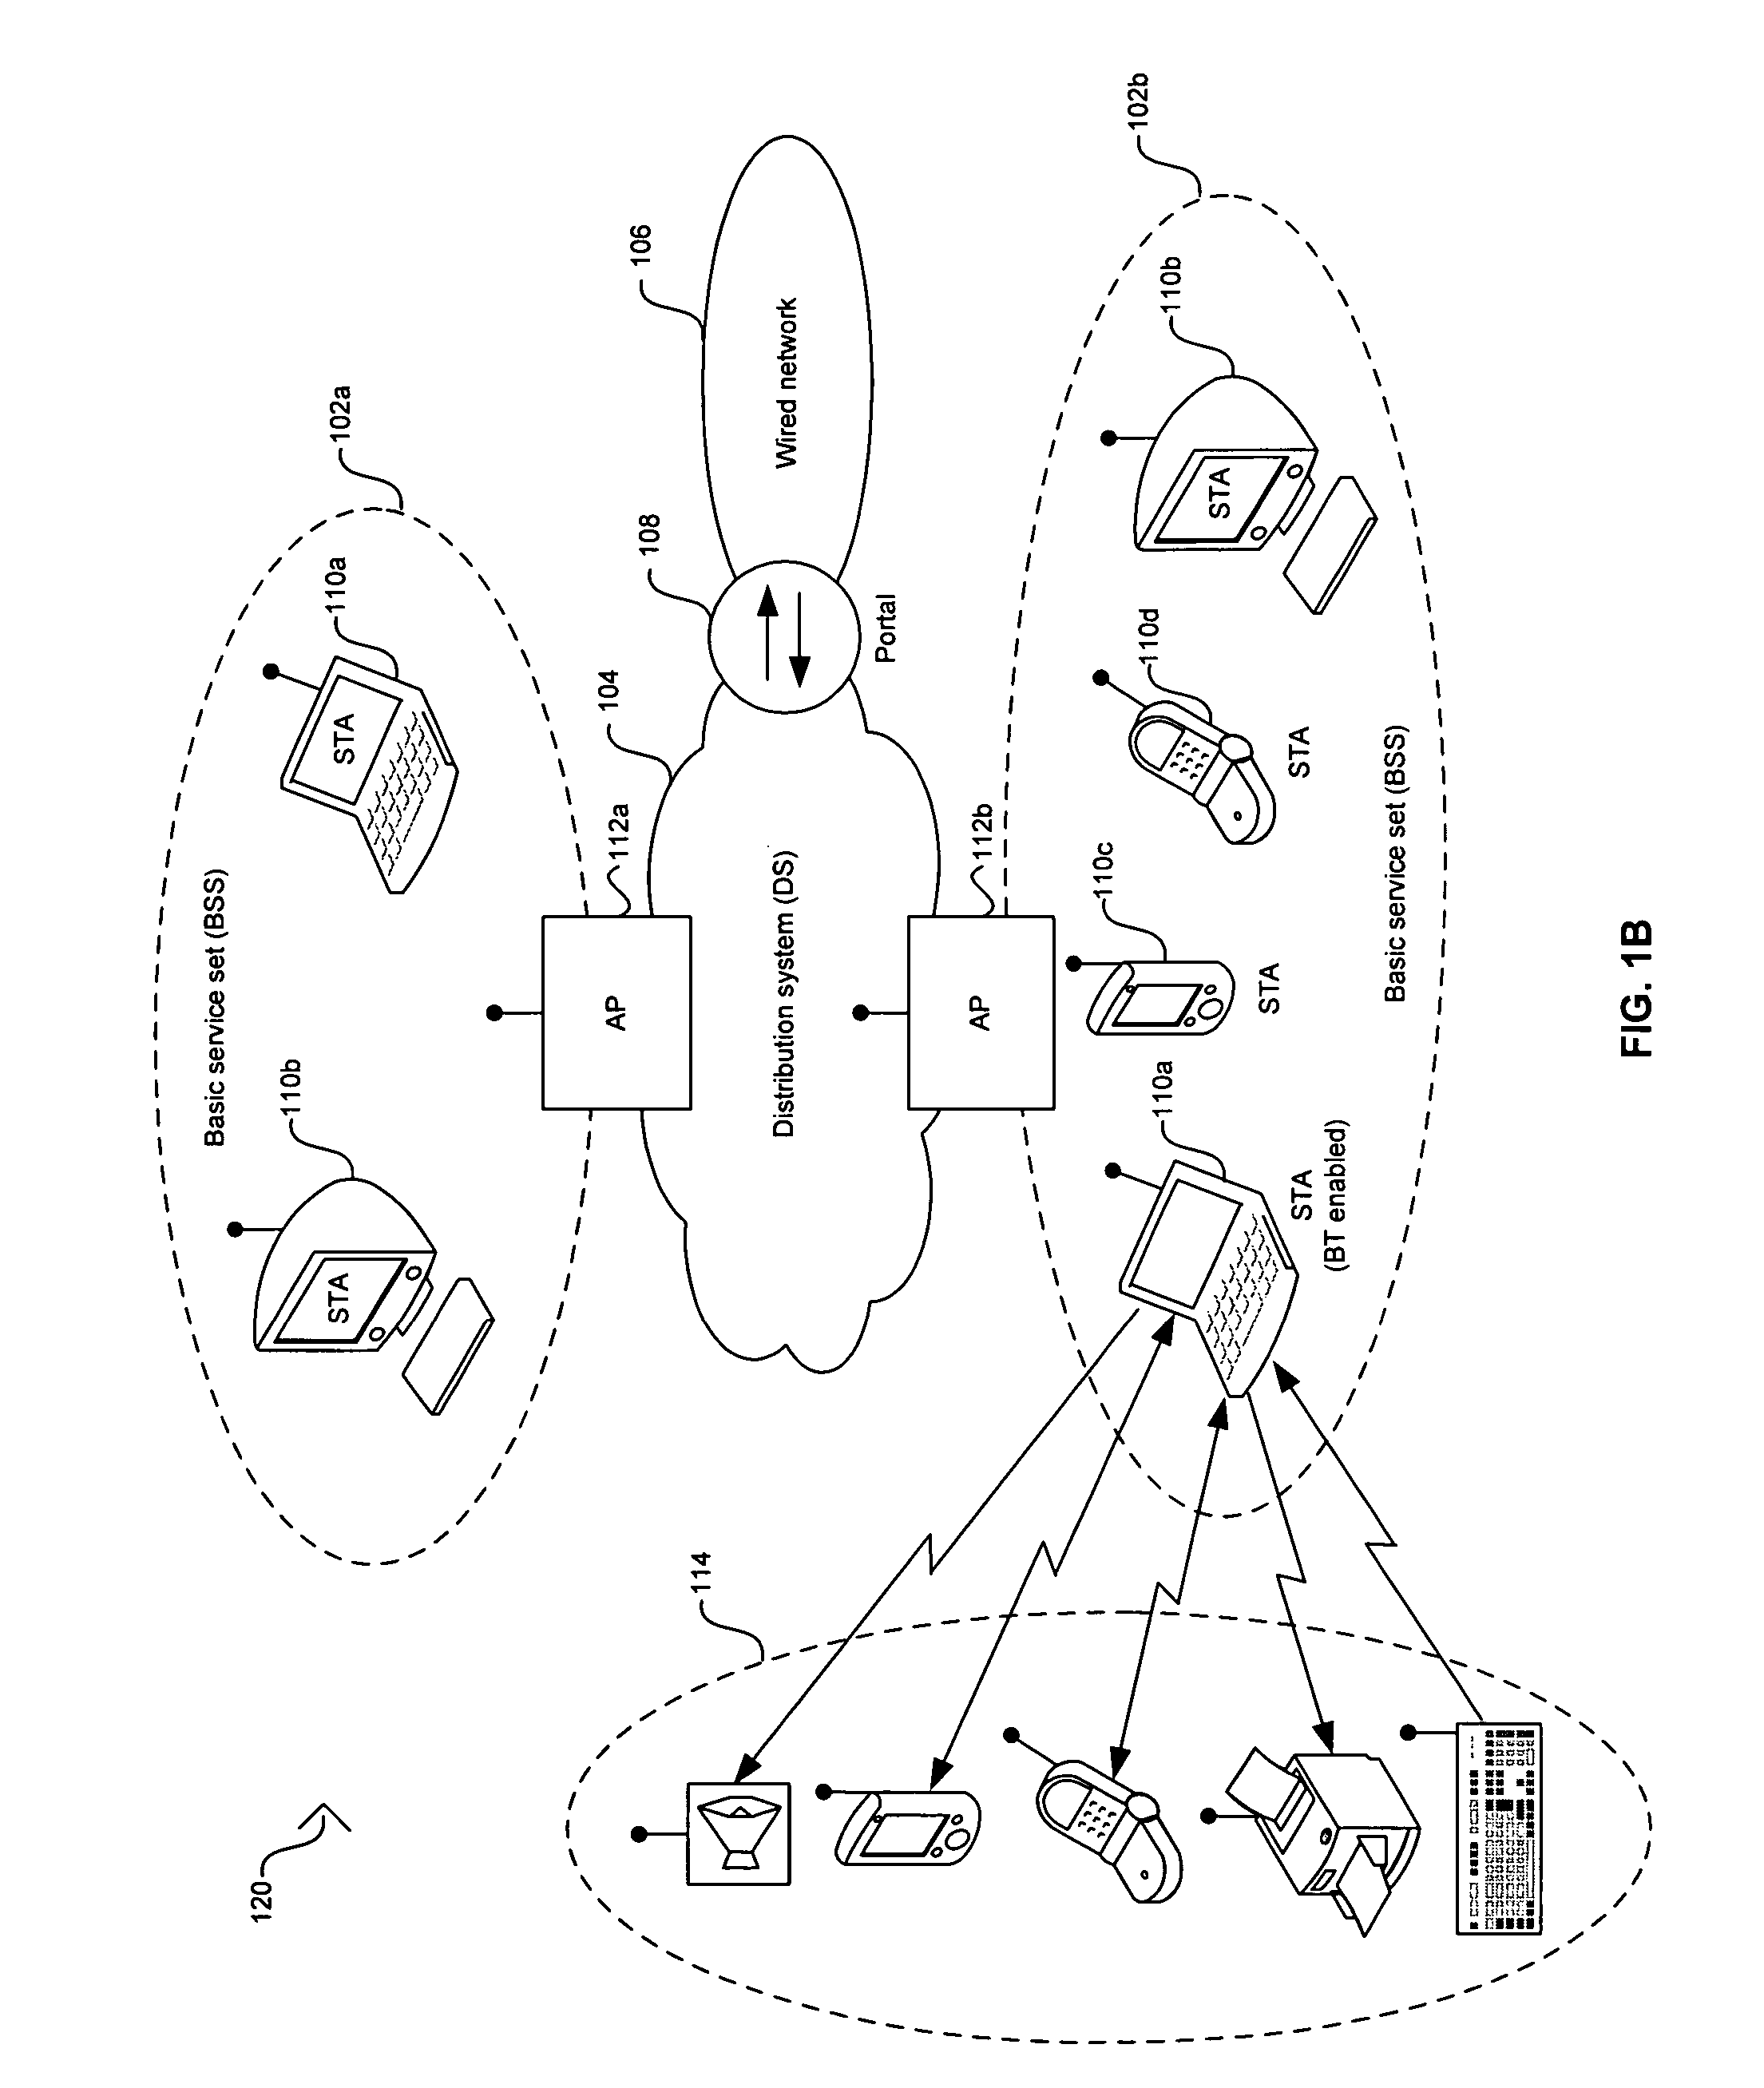 Method and system for sharing a single antenna on platforms with collocated Bluetooth and IEEE 802.11 b/g devices